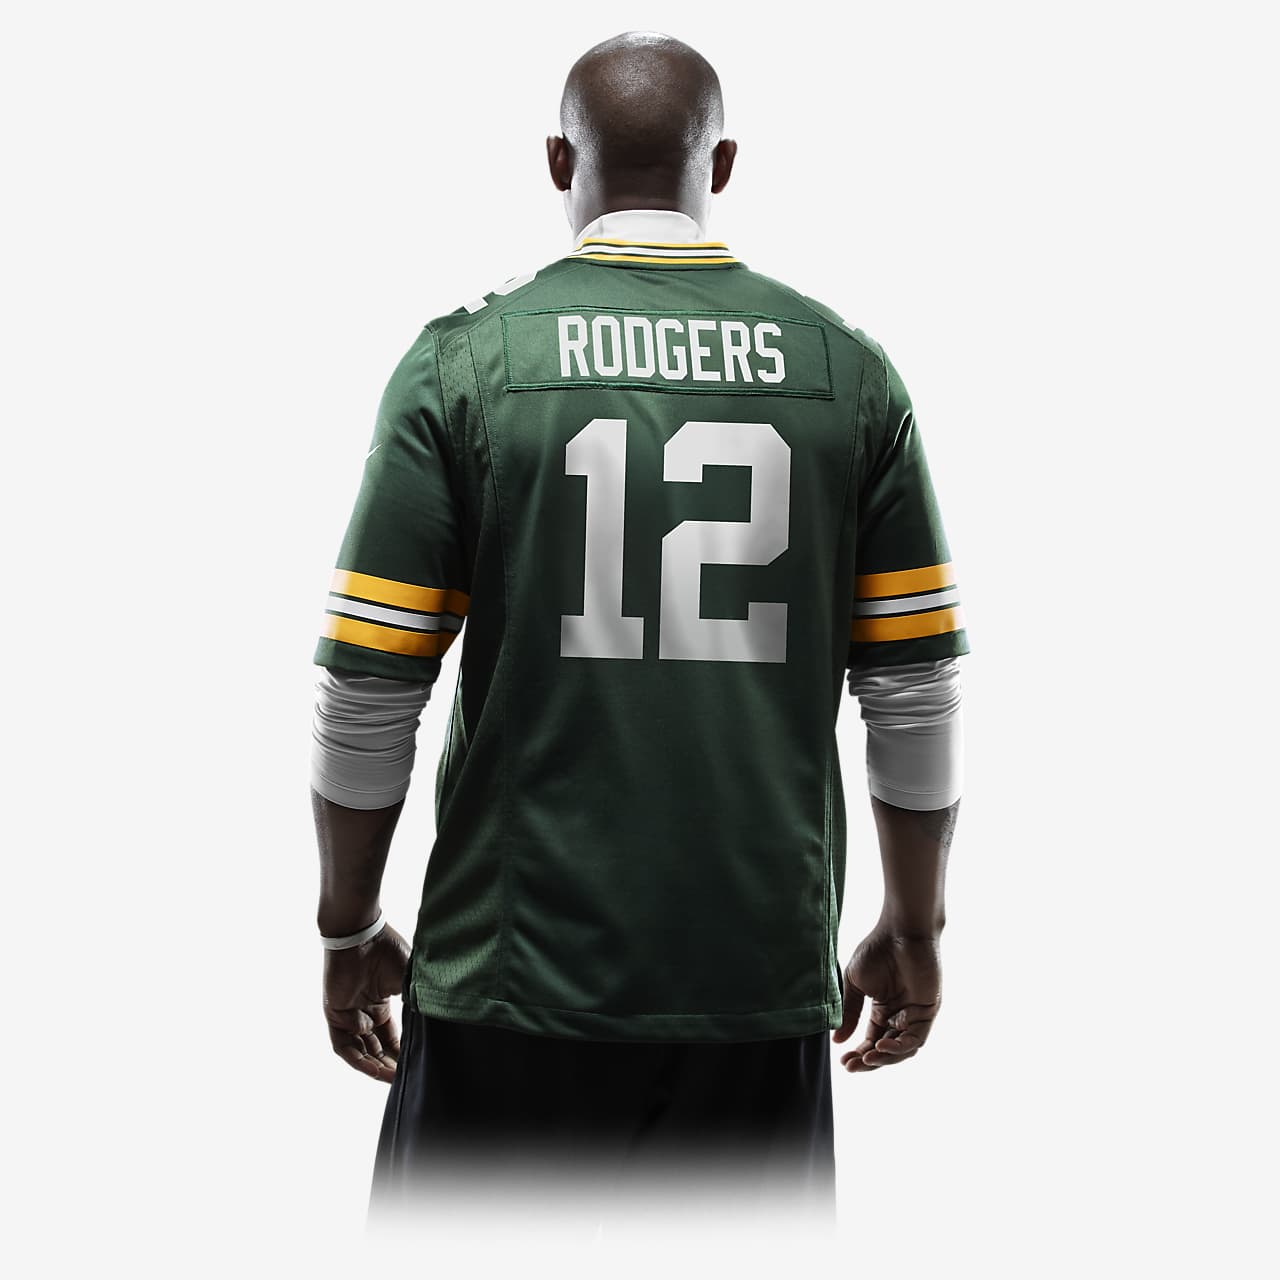 Extremely important Senate Ideally NFL Green Bay Packers (Aaron Rodgers) Men's Game Football Jersey. Nike.com